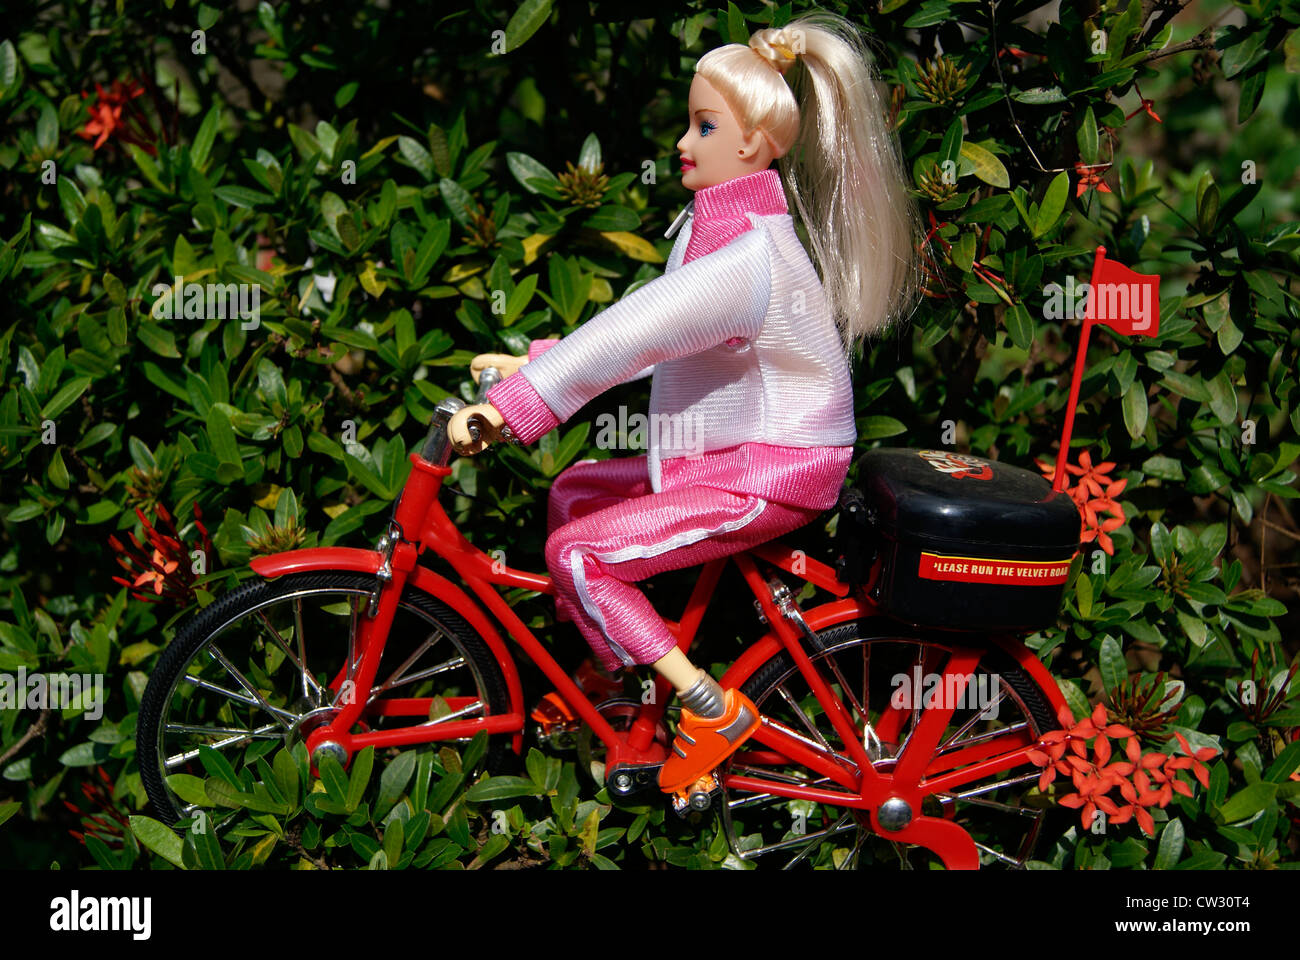 Barbie Doll Girl Riding cycle.Toy girl Rides bicycle through the Garden  Scenery concept of toy Kids stories Stock Photo - Alamy